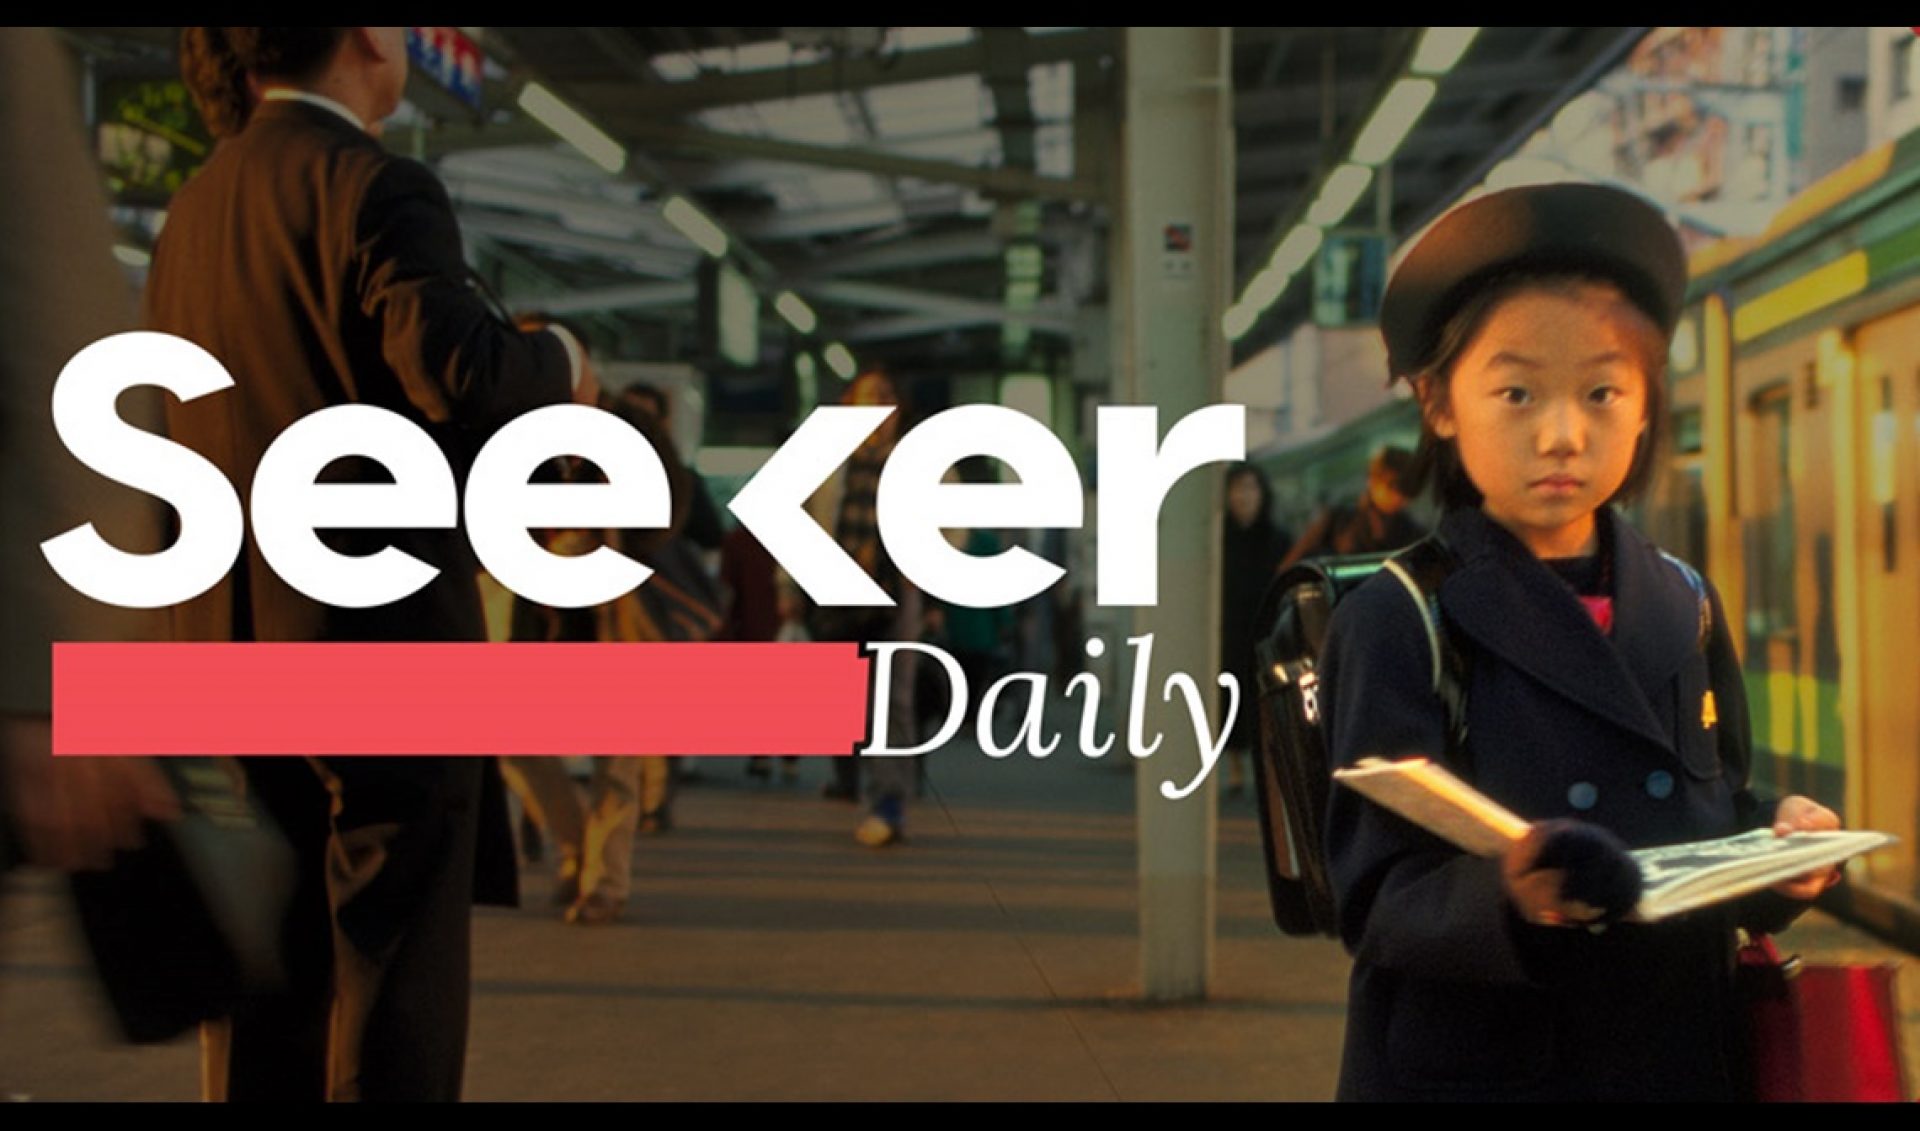 YouTube Millionaires: Seeker Daily Helps Viewers “Better Make Sense Of The World Around Us”